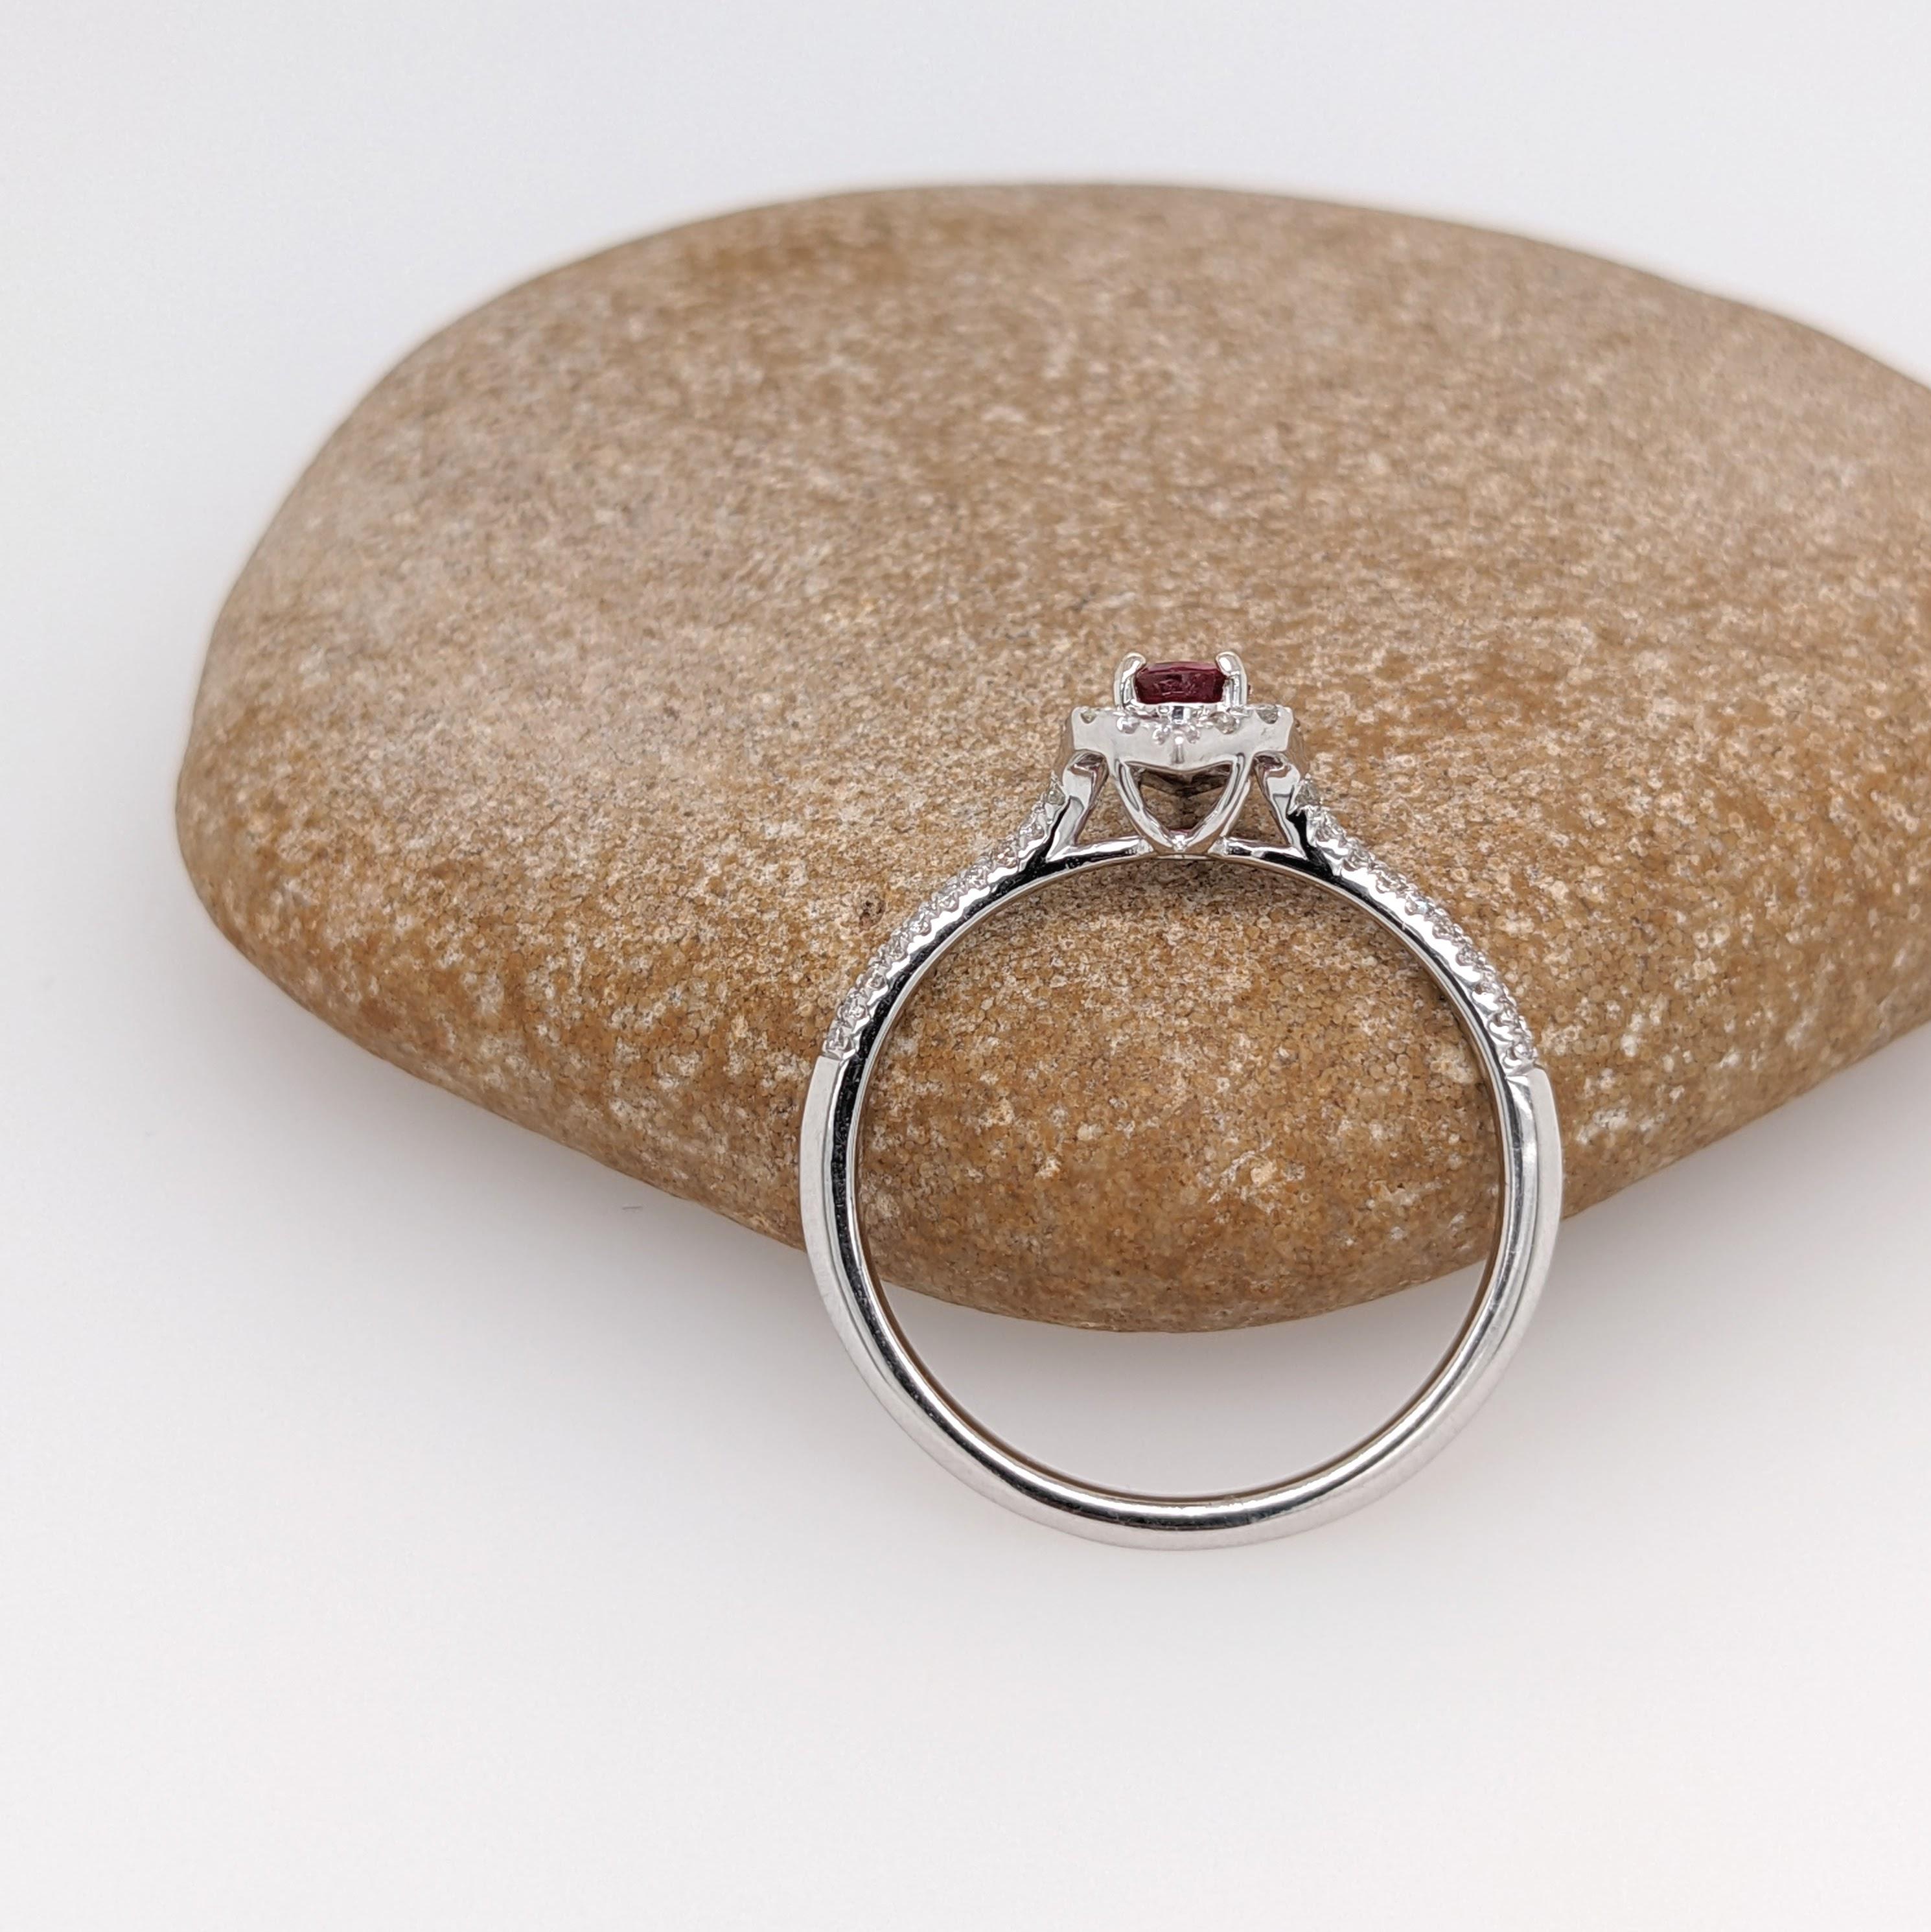 Vintage Inspired Ruby Ring w Diamond Halo in 14K White Gold Oval 5x3.5mm 1